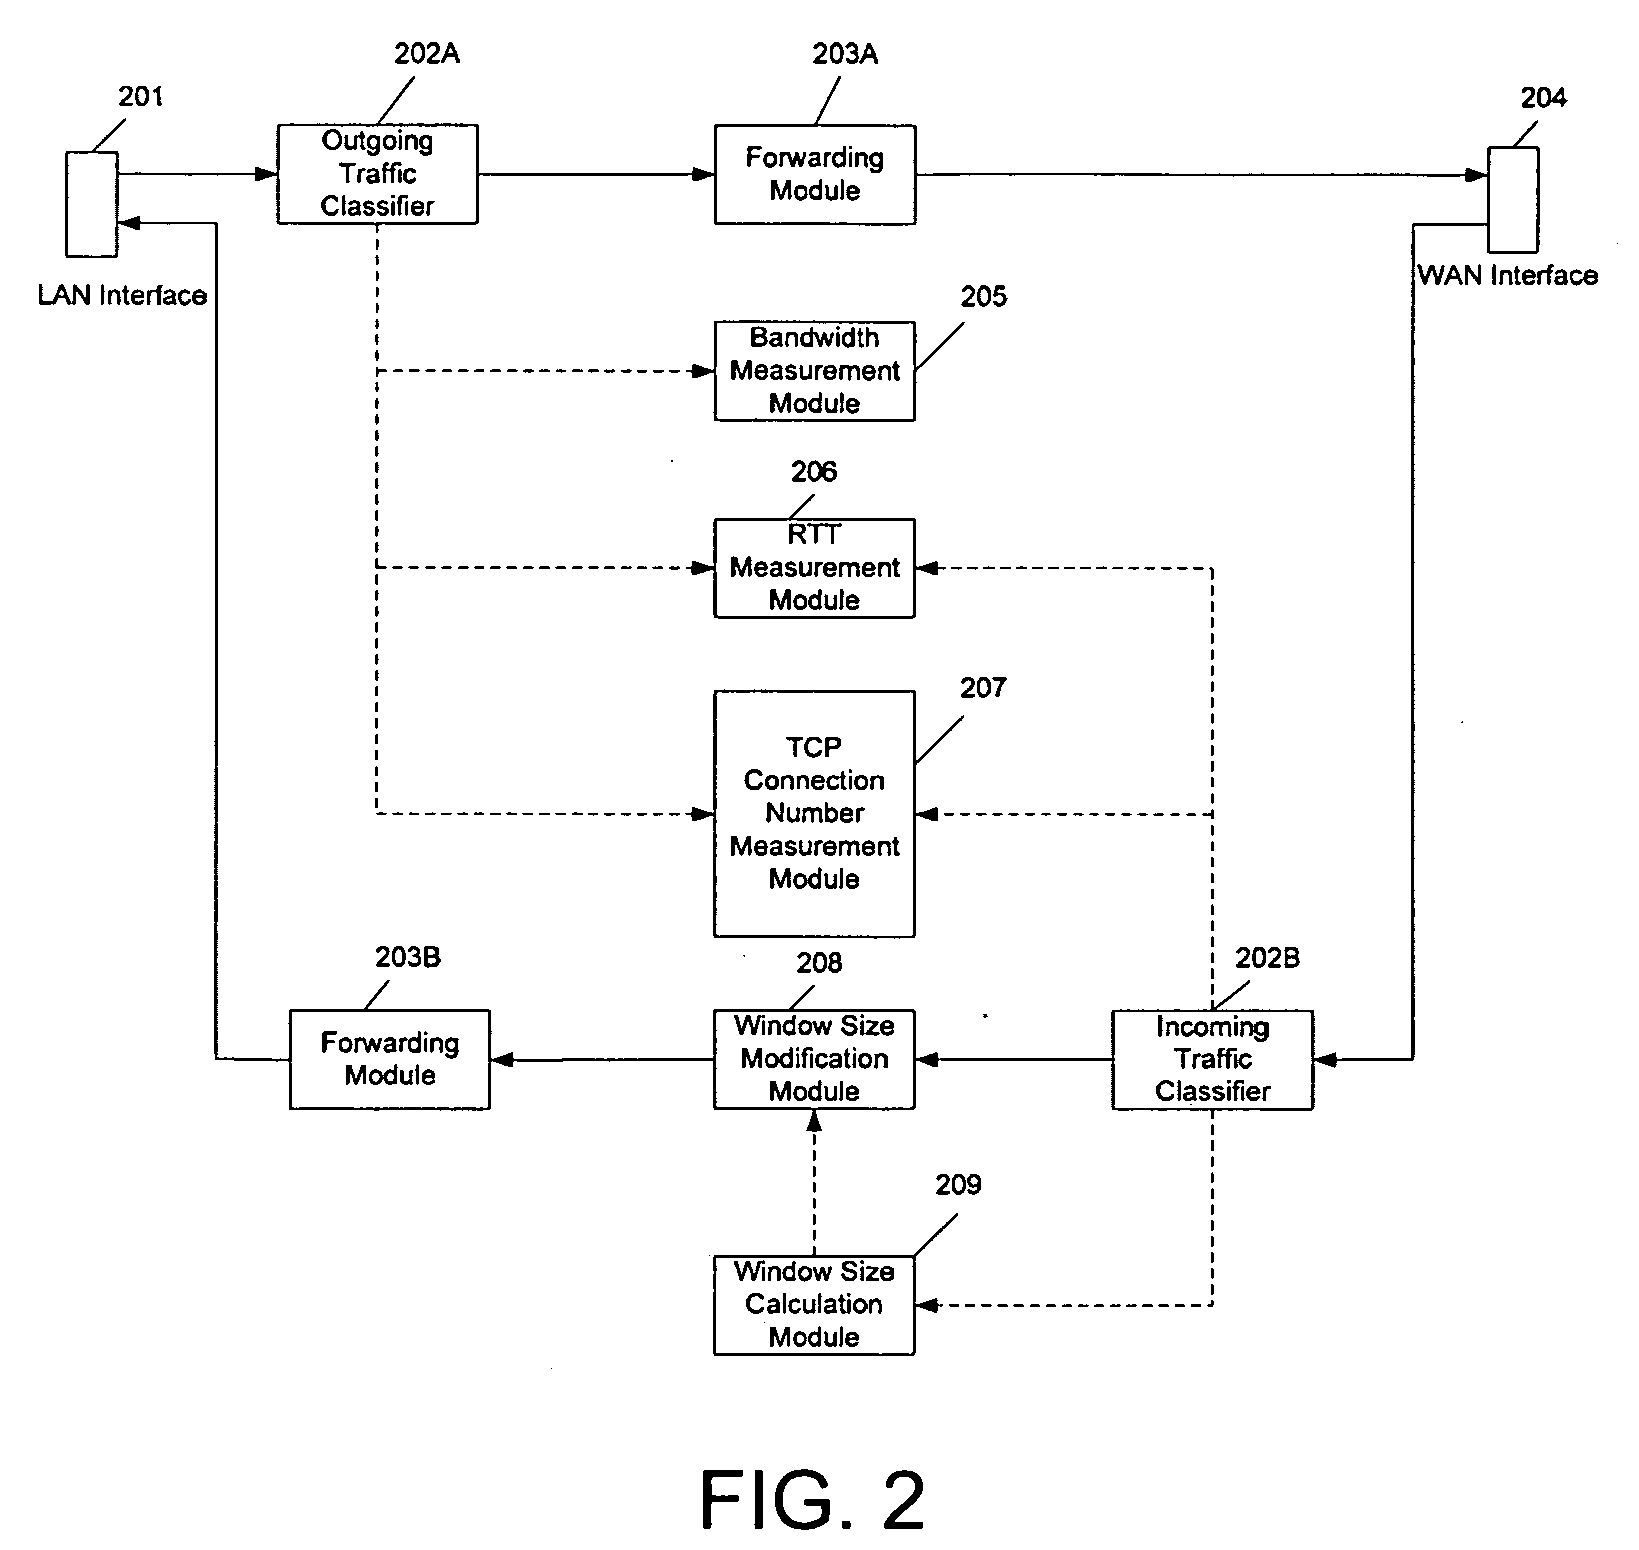 Method and device for hign utilization and efficient flow control over networks with long transmission latency